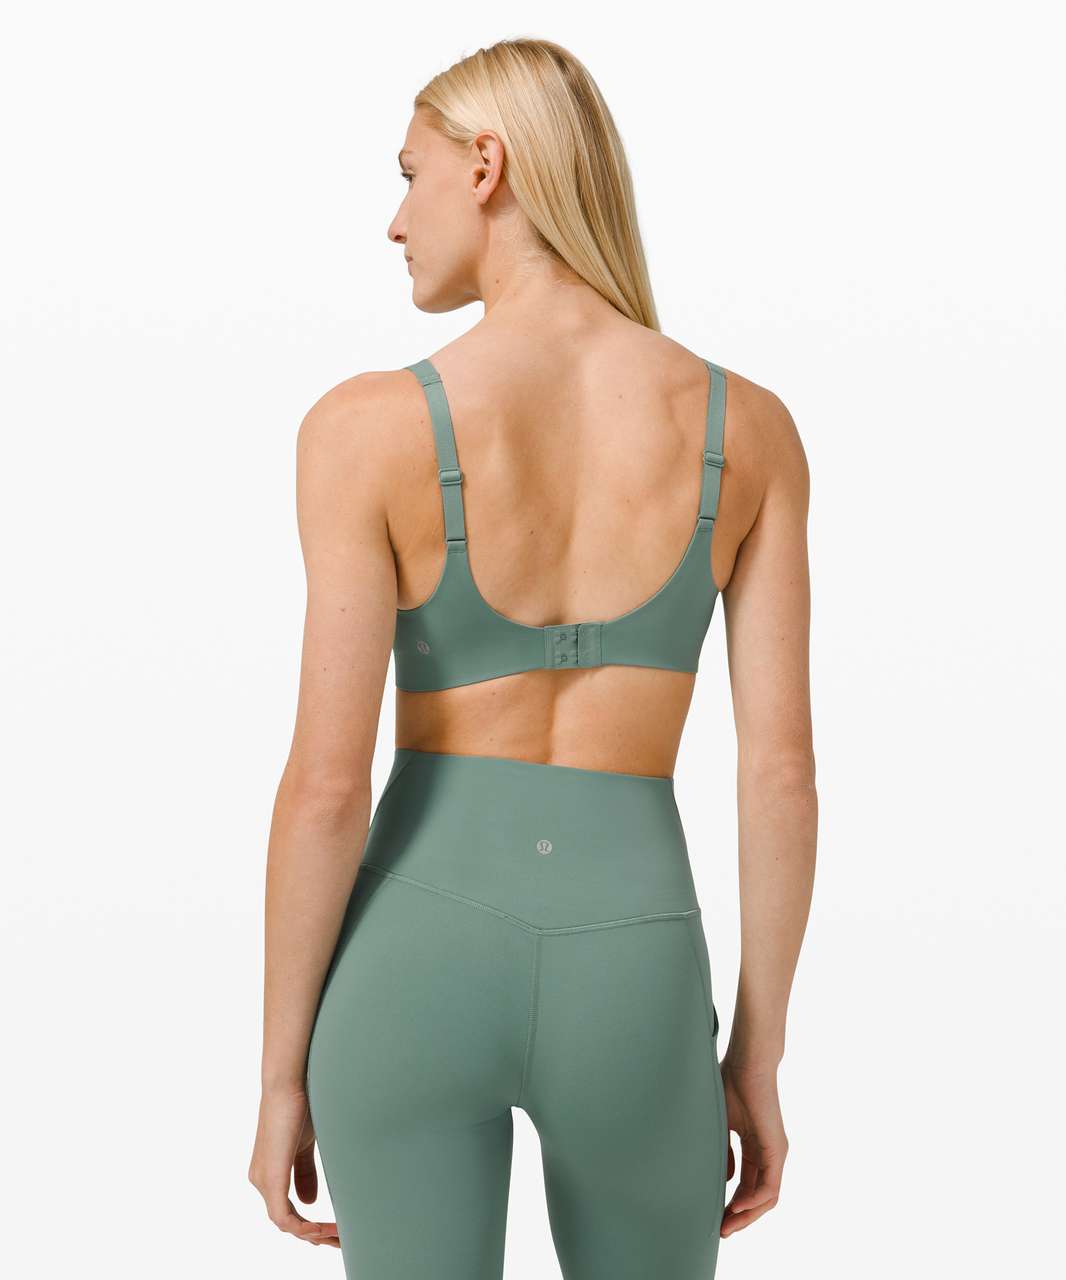 Lululemon In Alignment Straight Strap Bra *Light Support, A/B Cups - Tidewater Teal